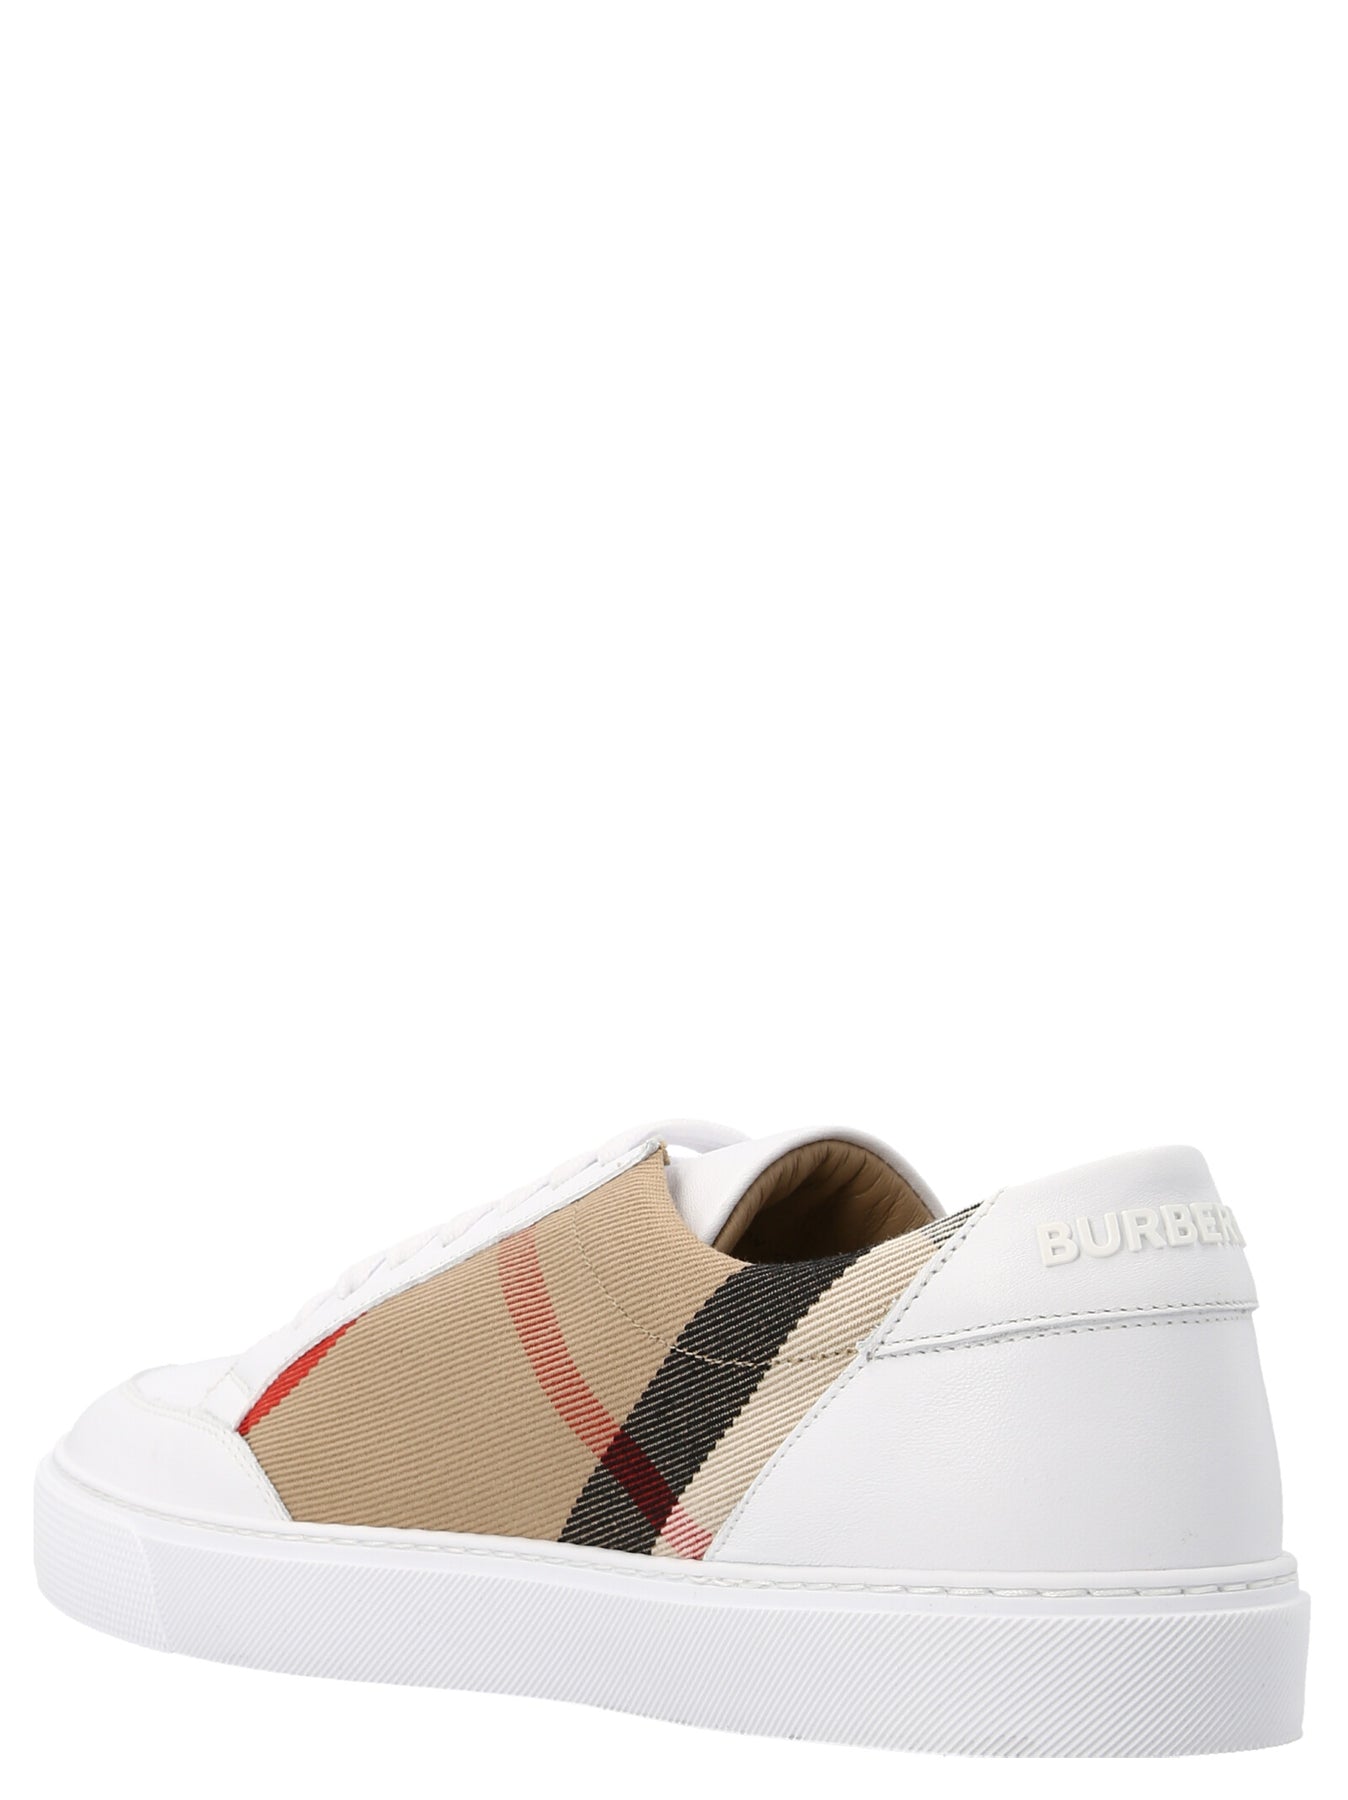 Shop Burberry New Salmond Sneakers